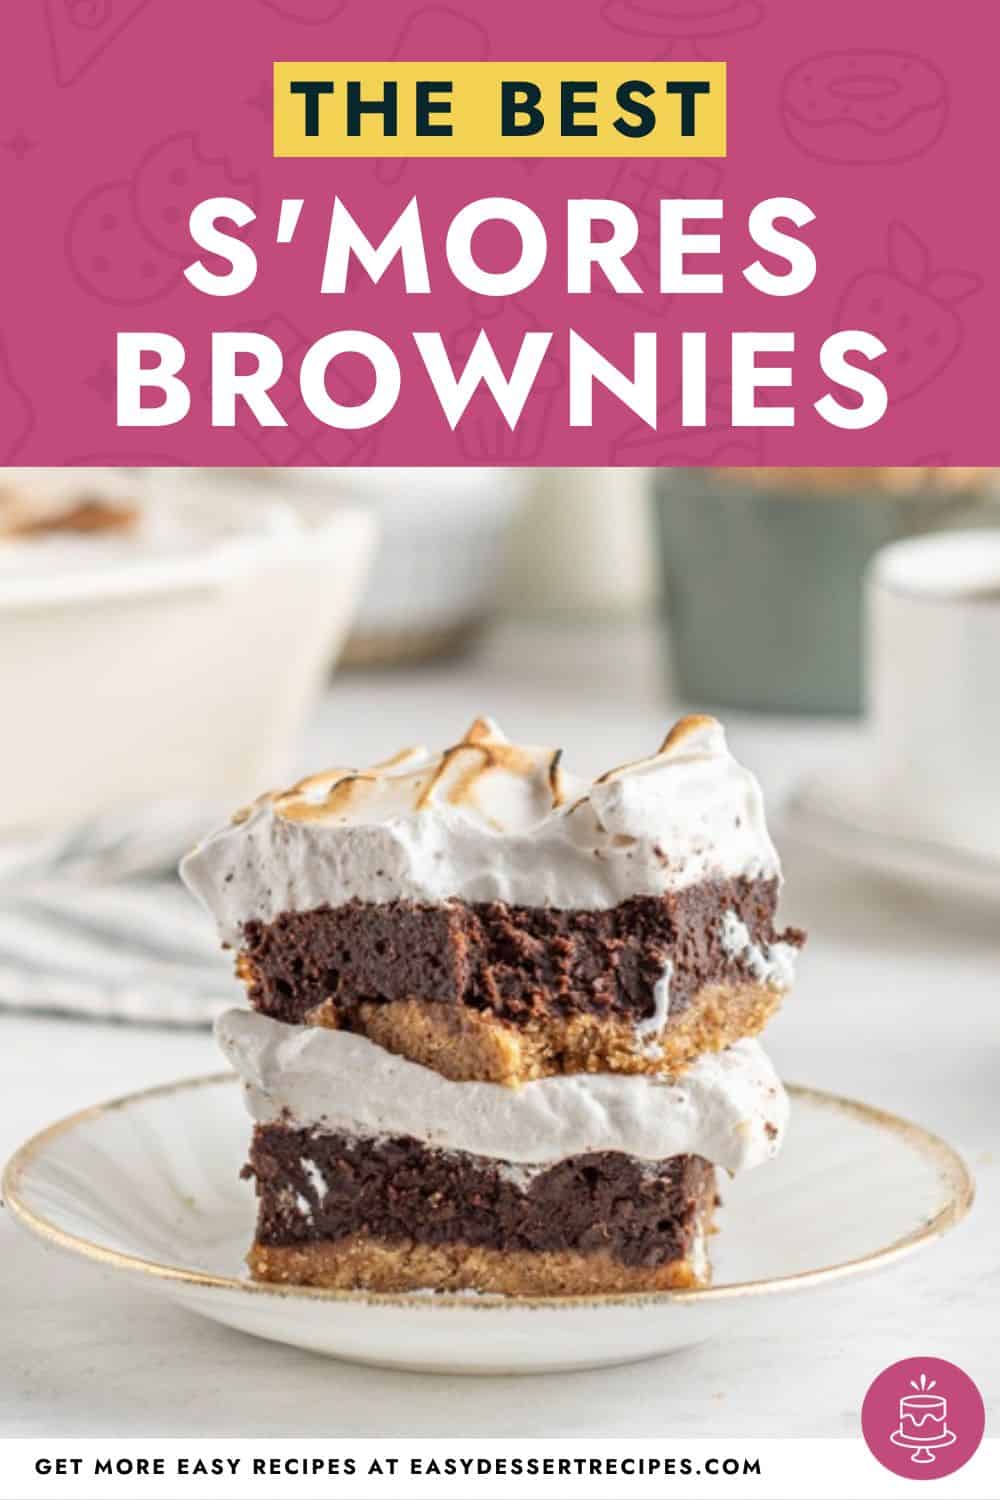 the best s'mores brownies.